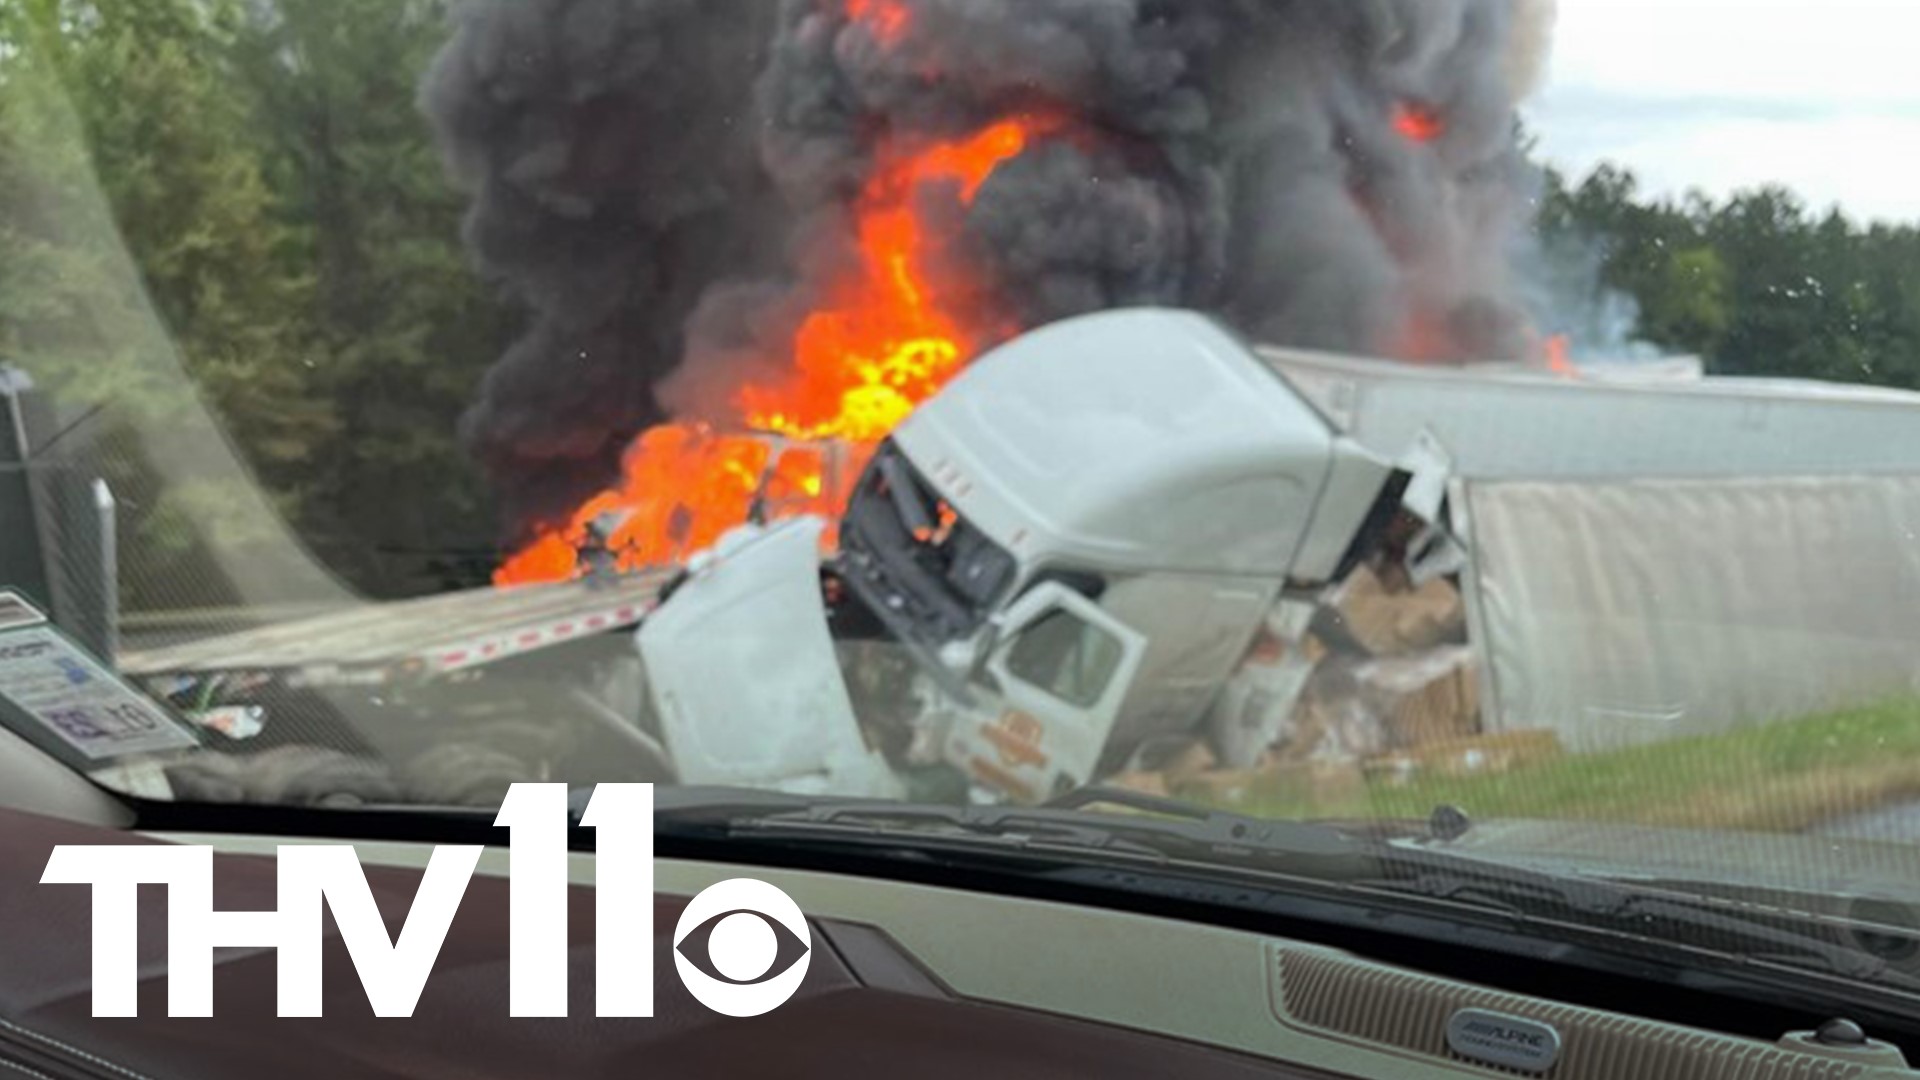 Traffic on both directions of I-30 is blocked outside of Malvern after a fiery crash involving at least eight 18-wheelers.